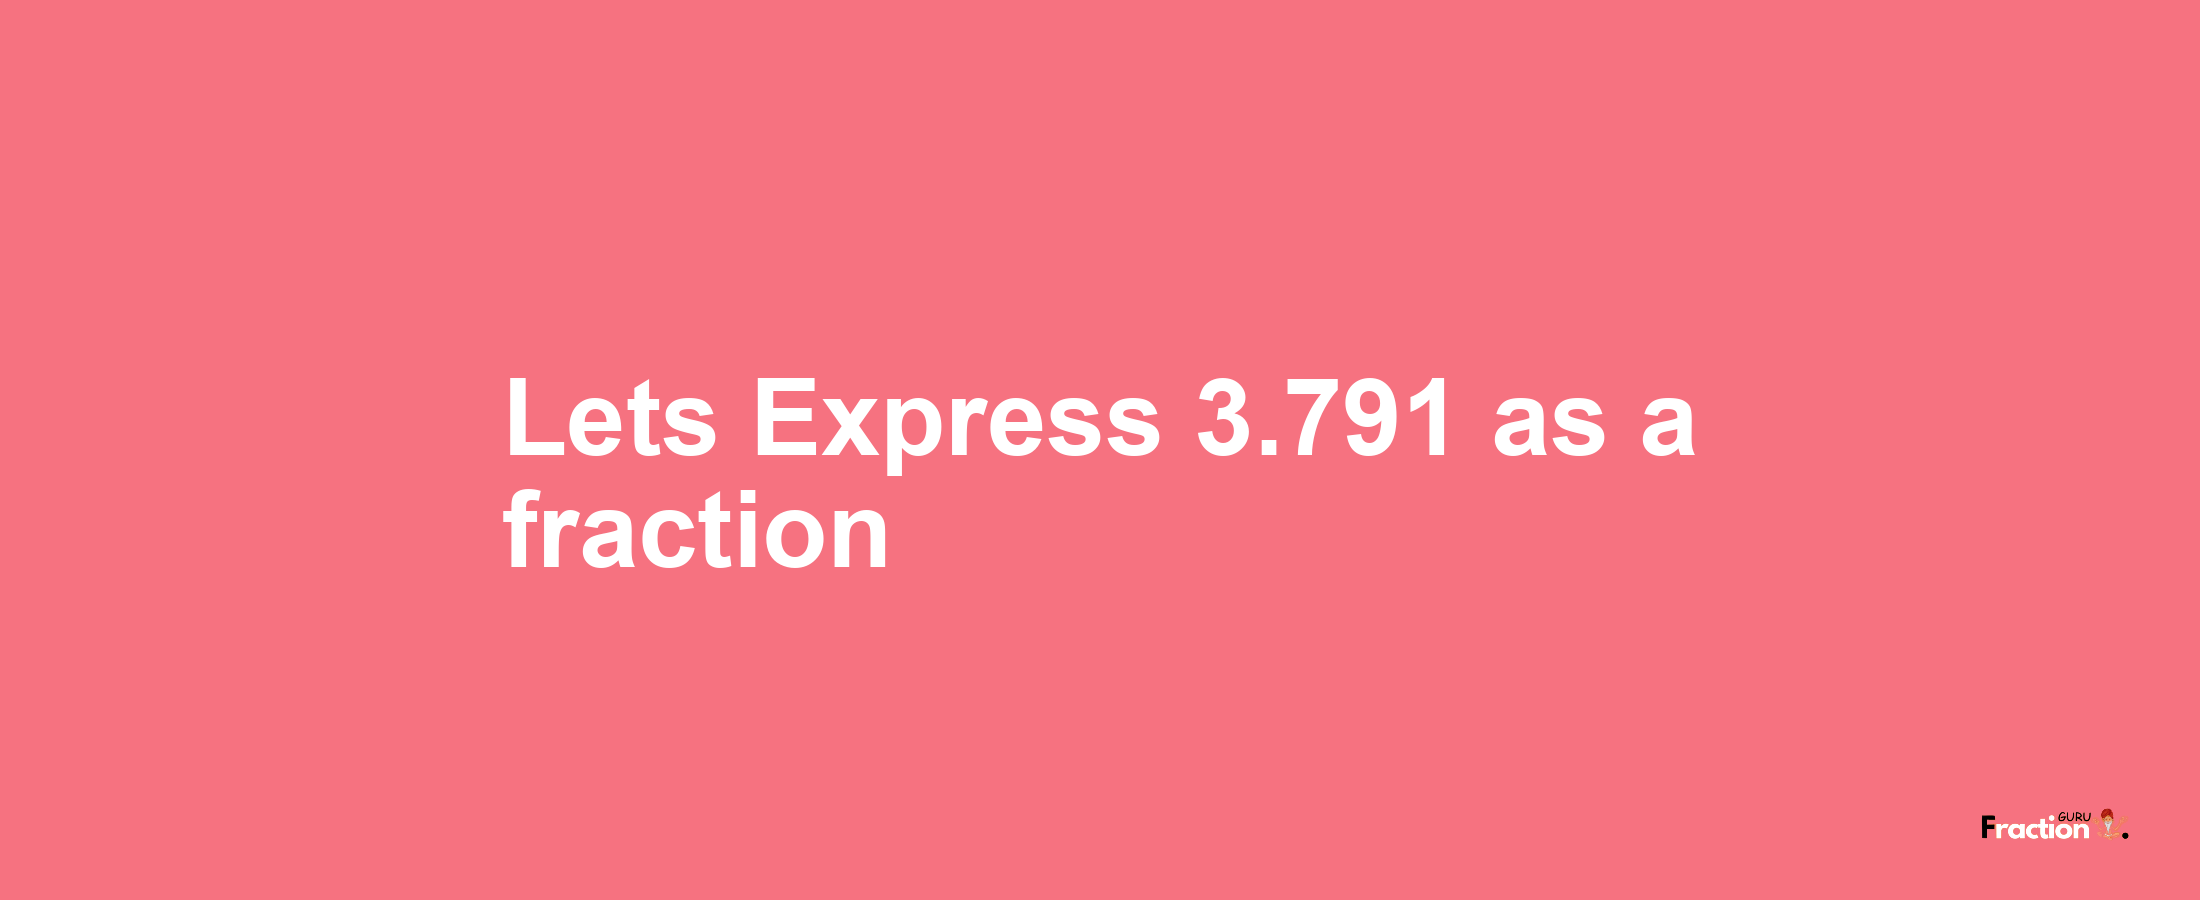 Lets Express 3.791 as afraction